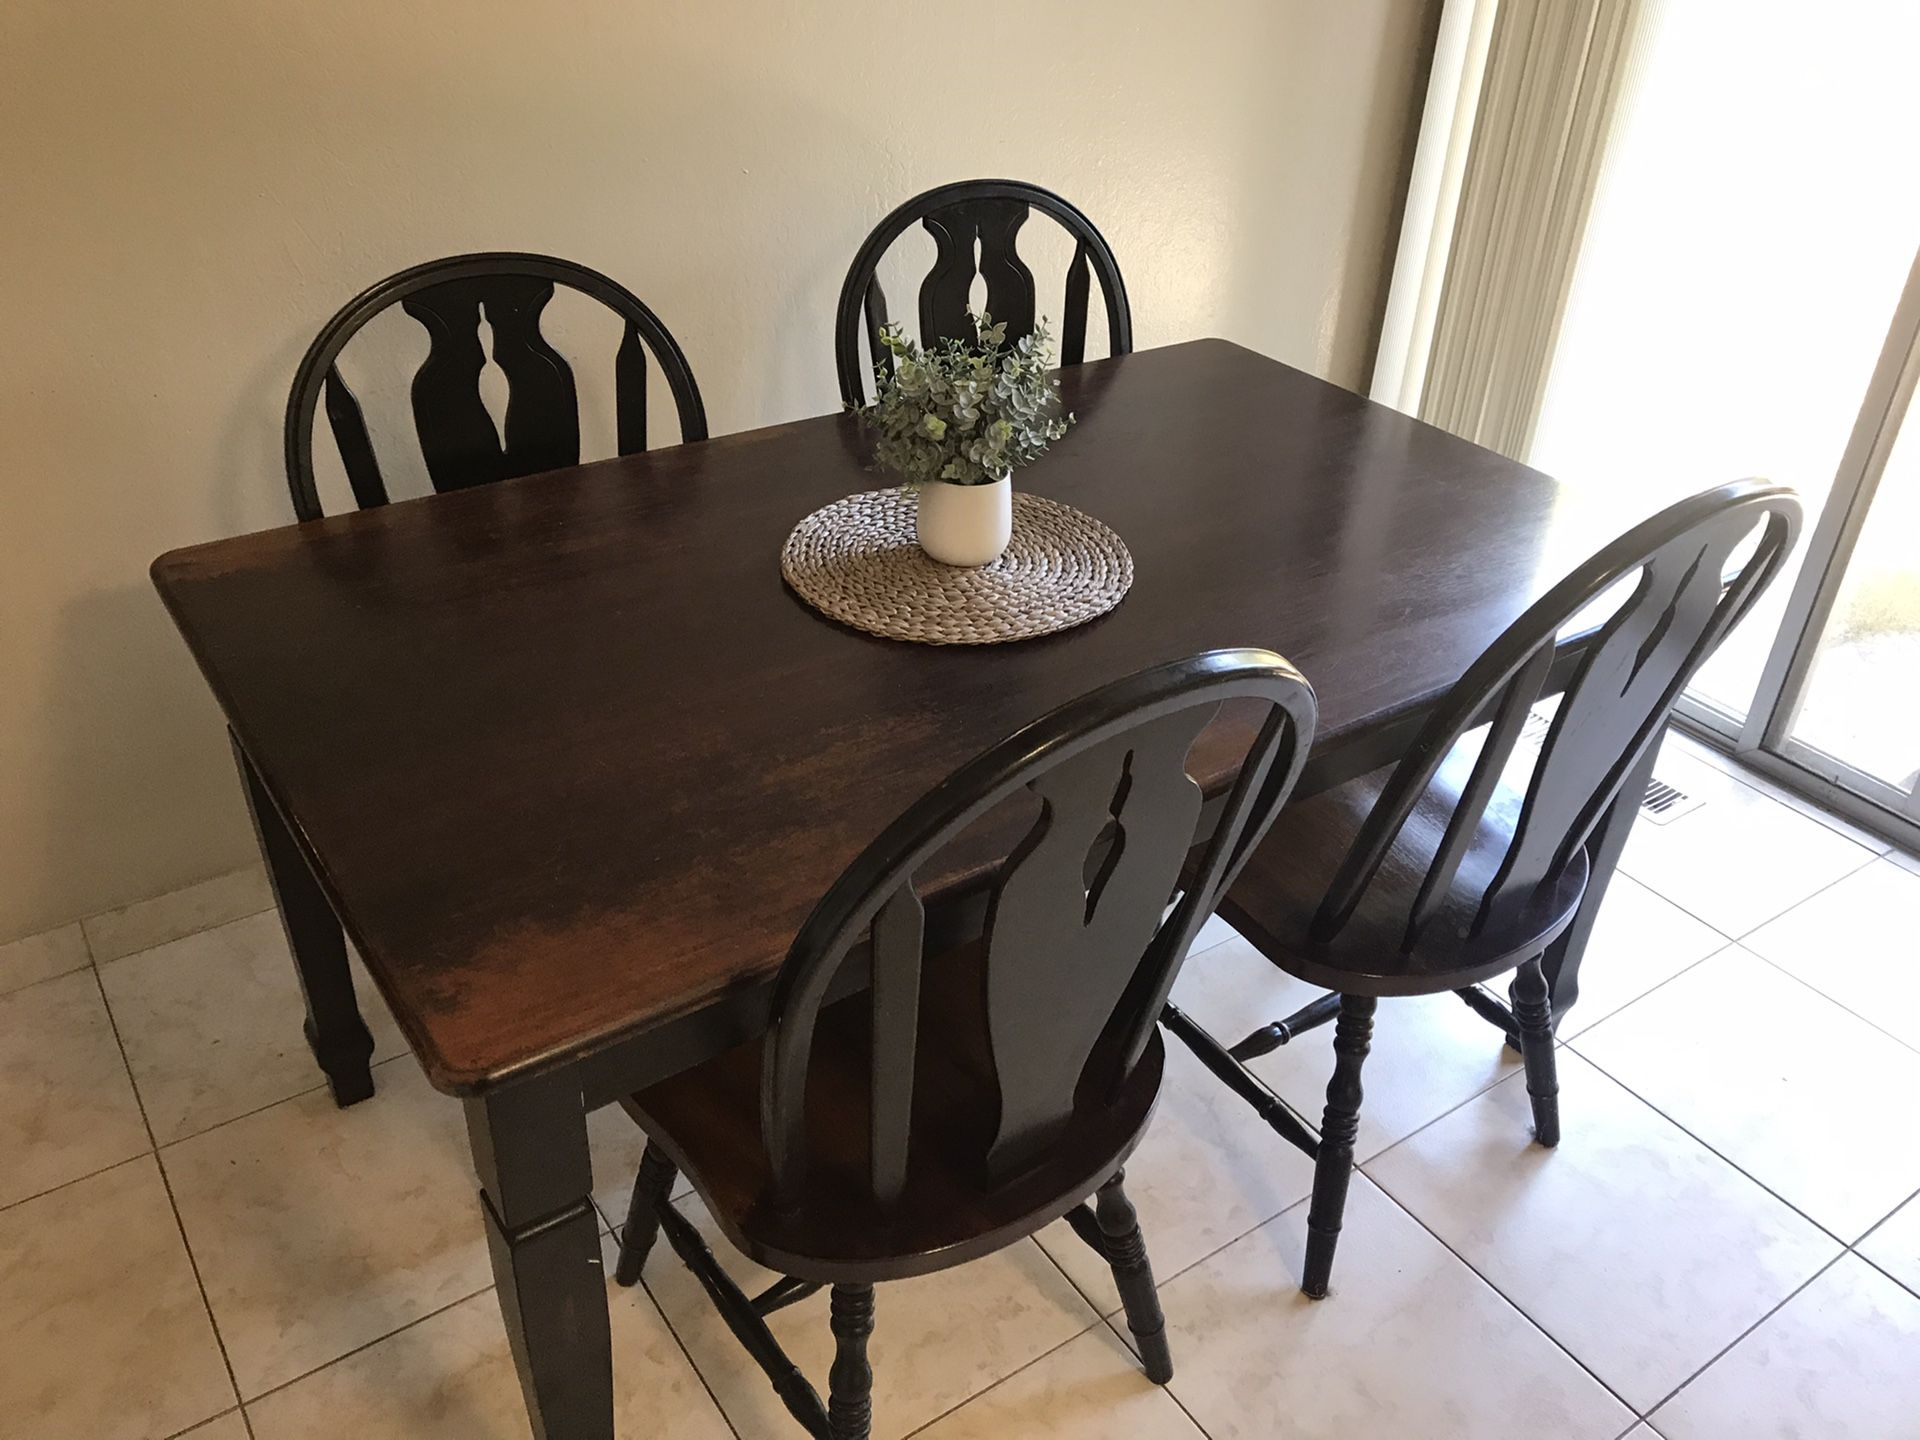 Kitchen table and chairs (solid wood)